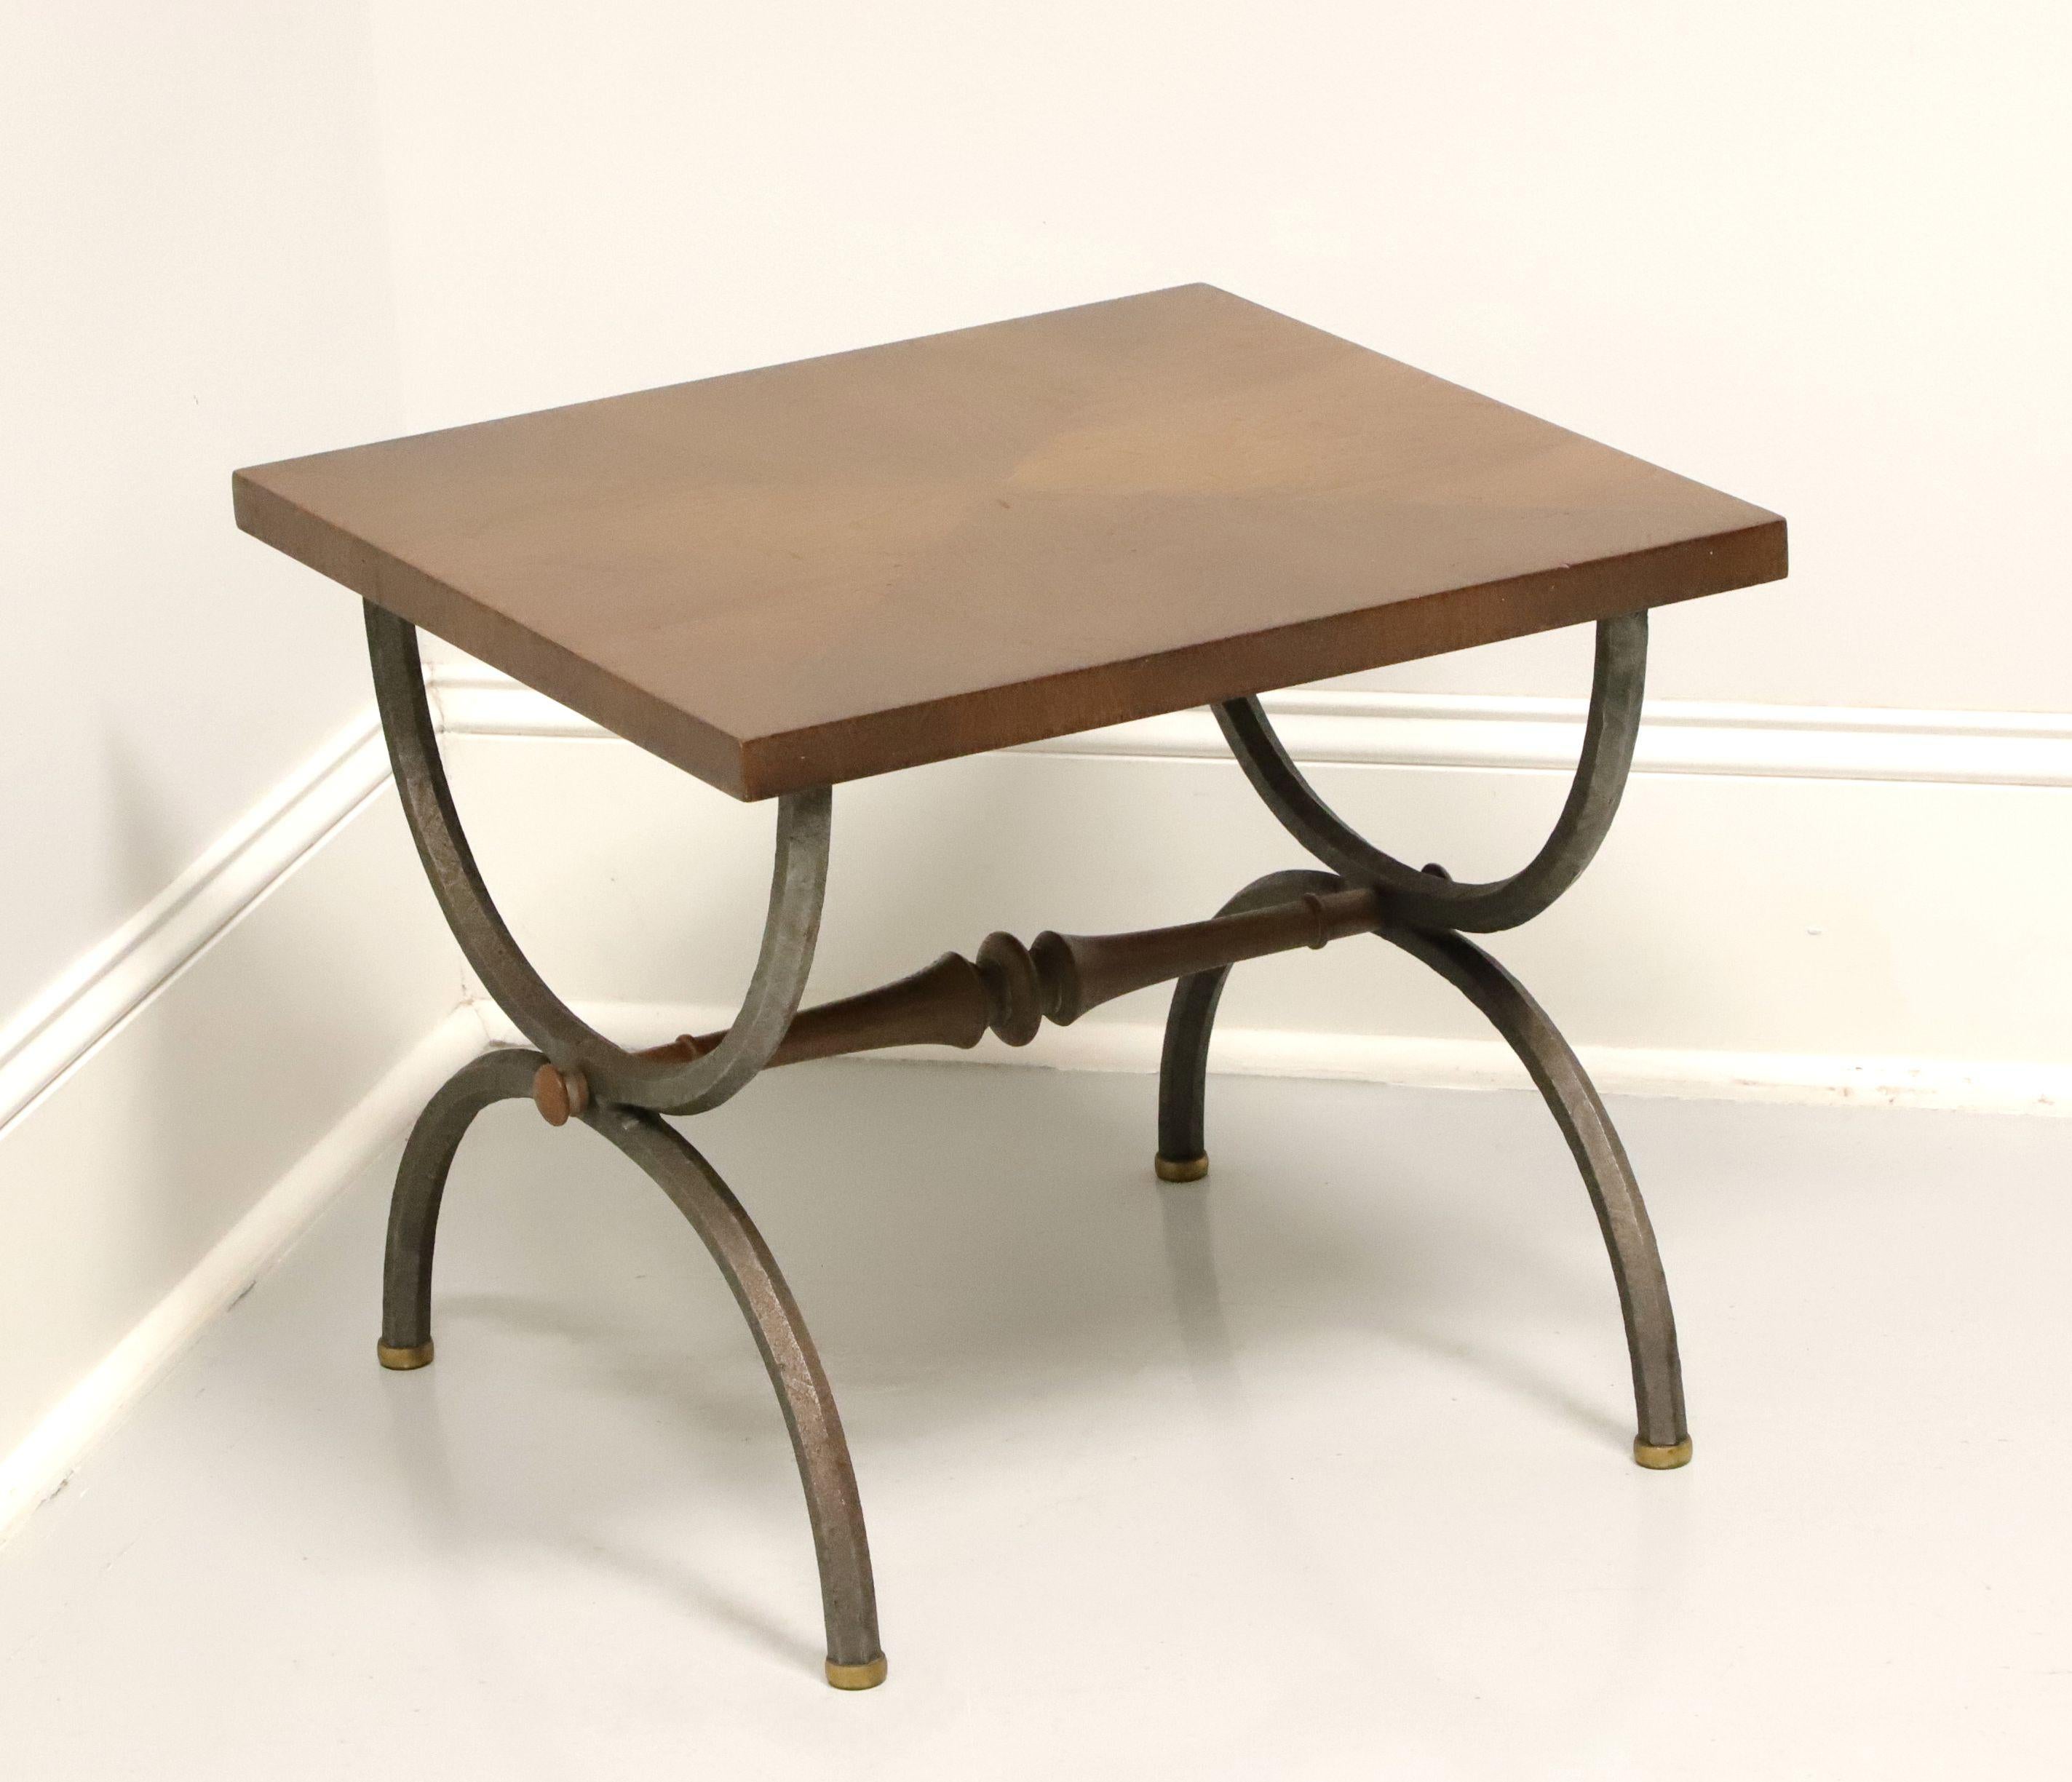 TOMLINSON 1960's Walnut Square Cocktail Table with Metal Legs - A 1